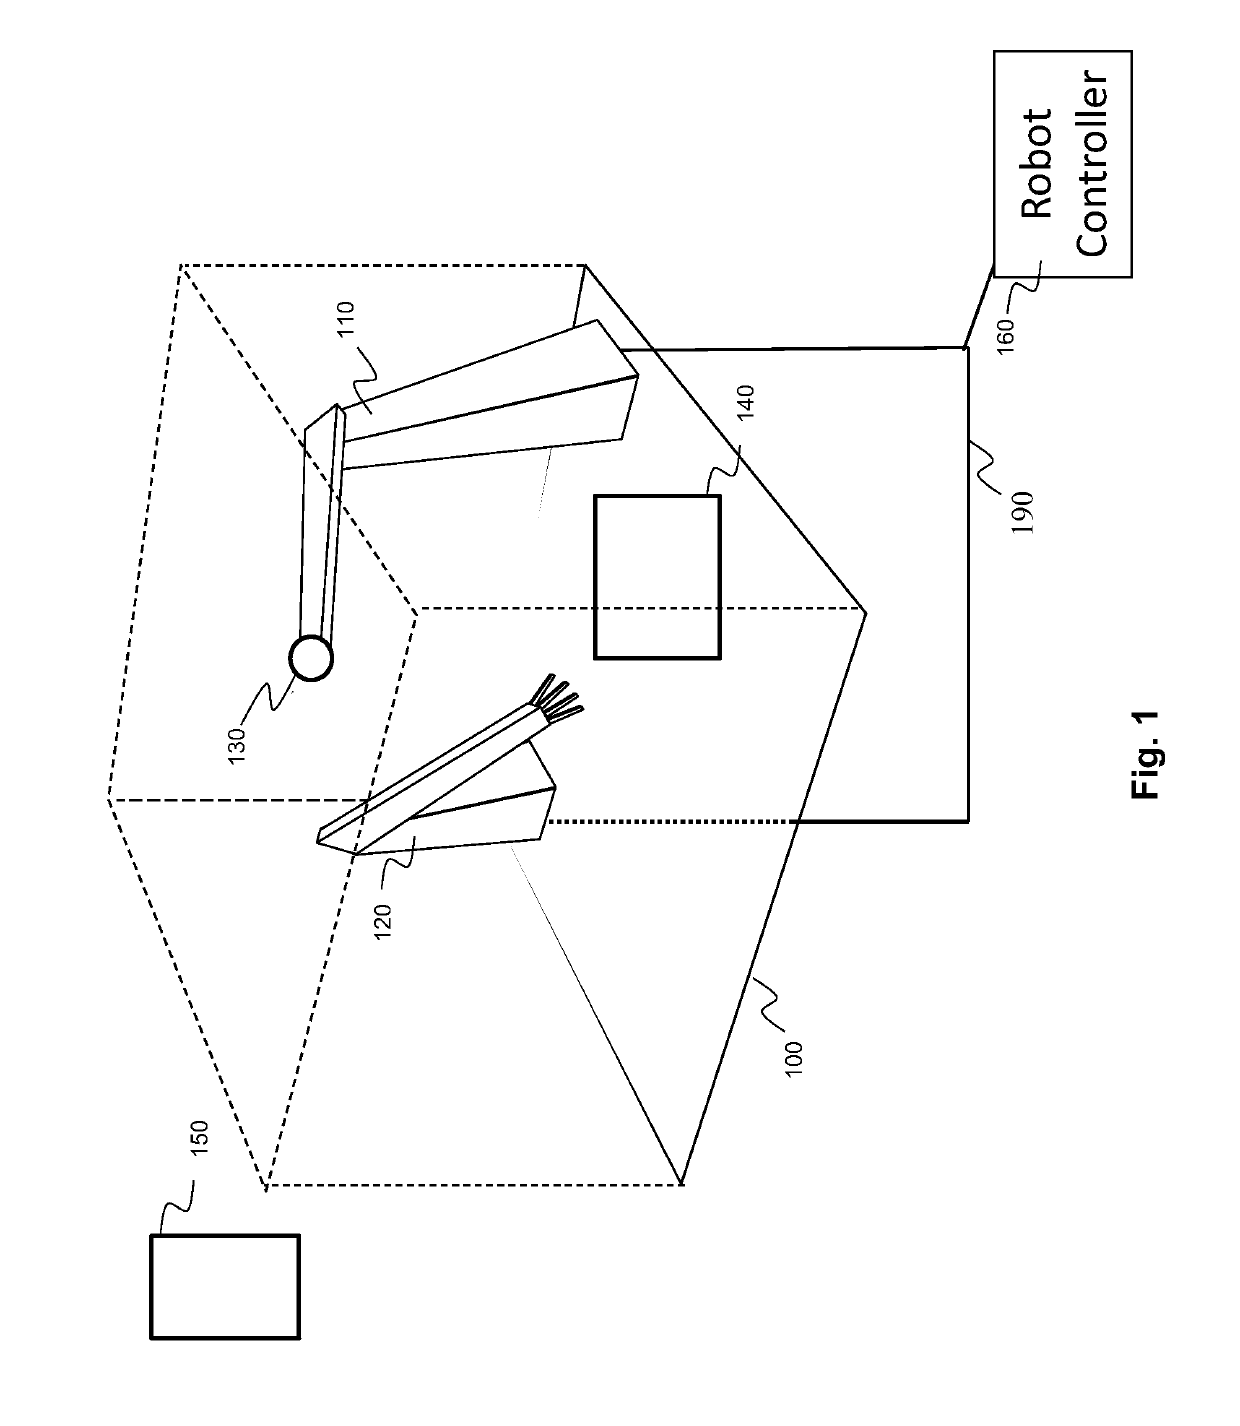 Method and apparatus for transmitting sensor data in a wireless network